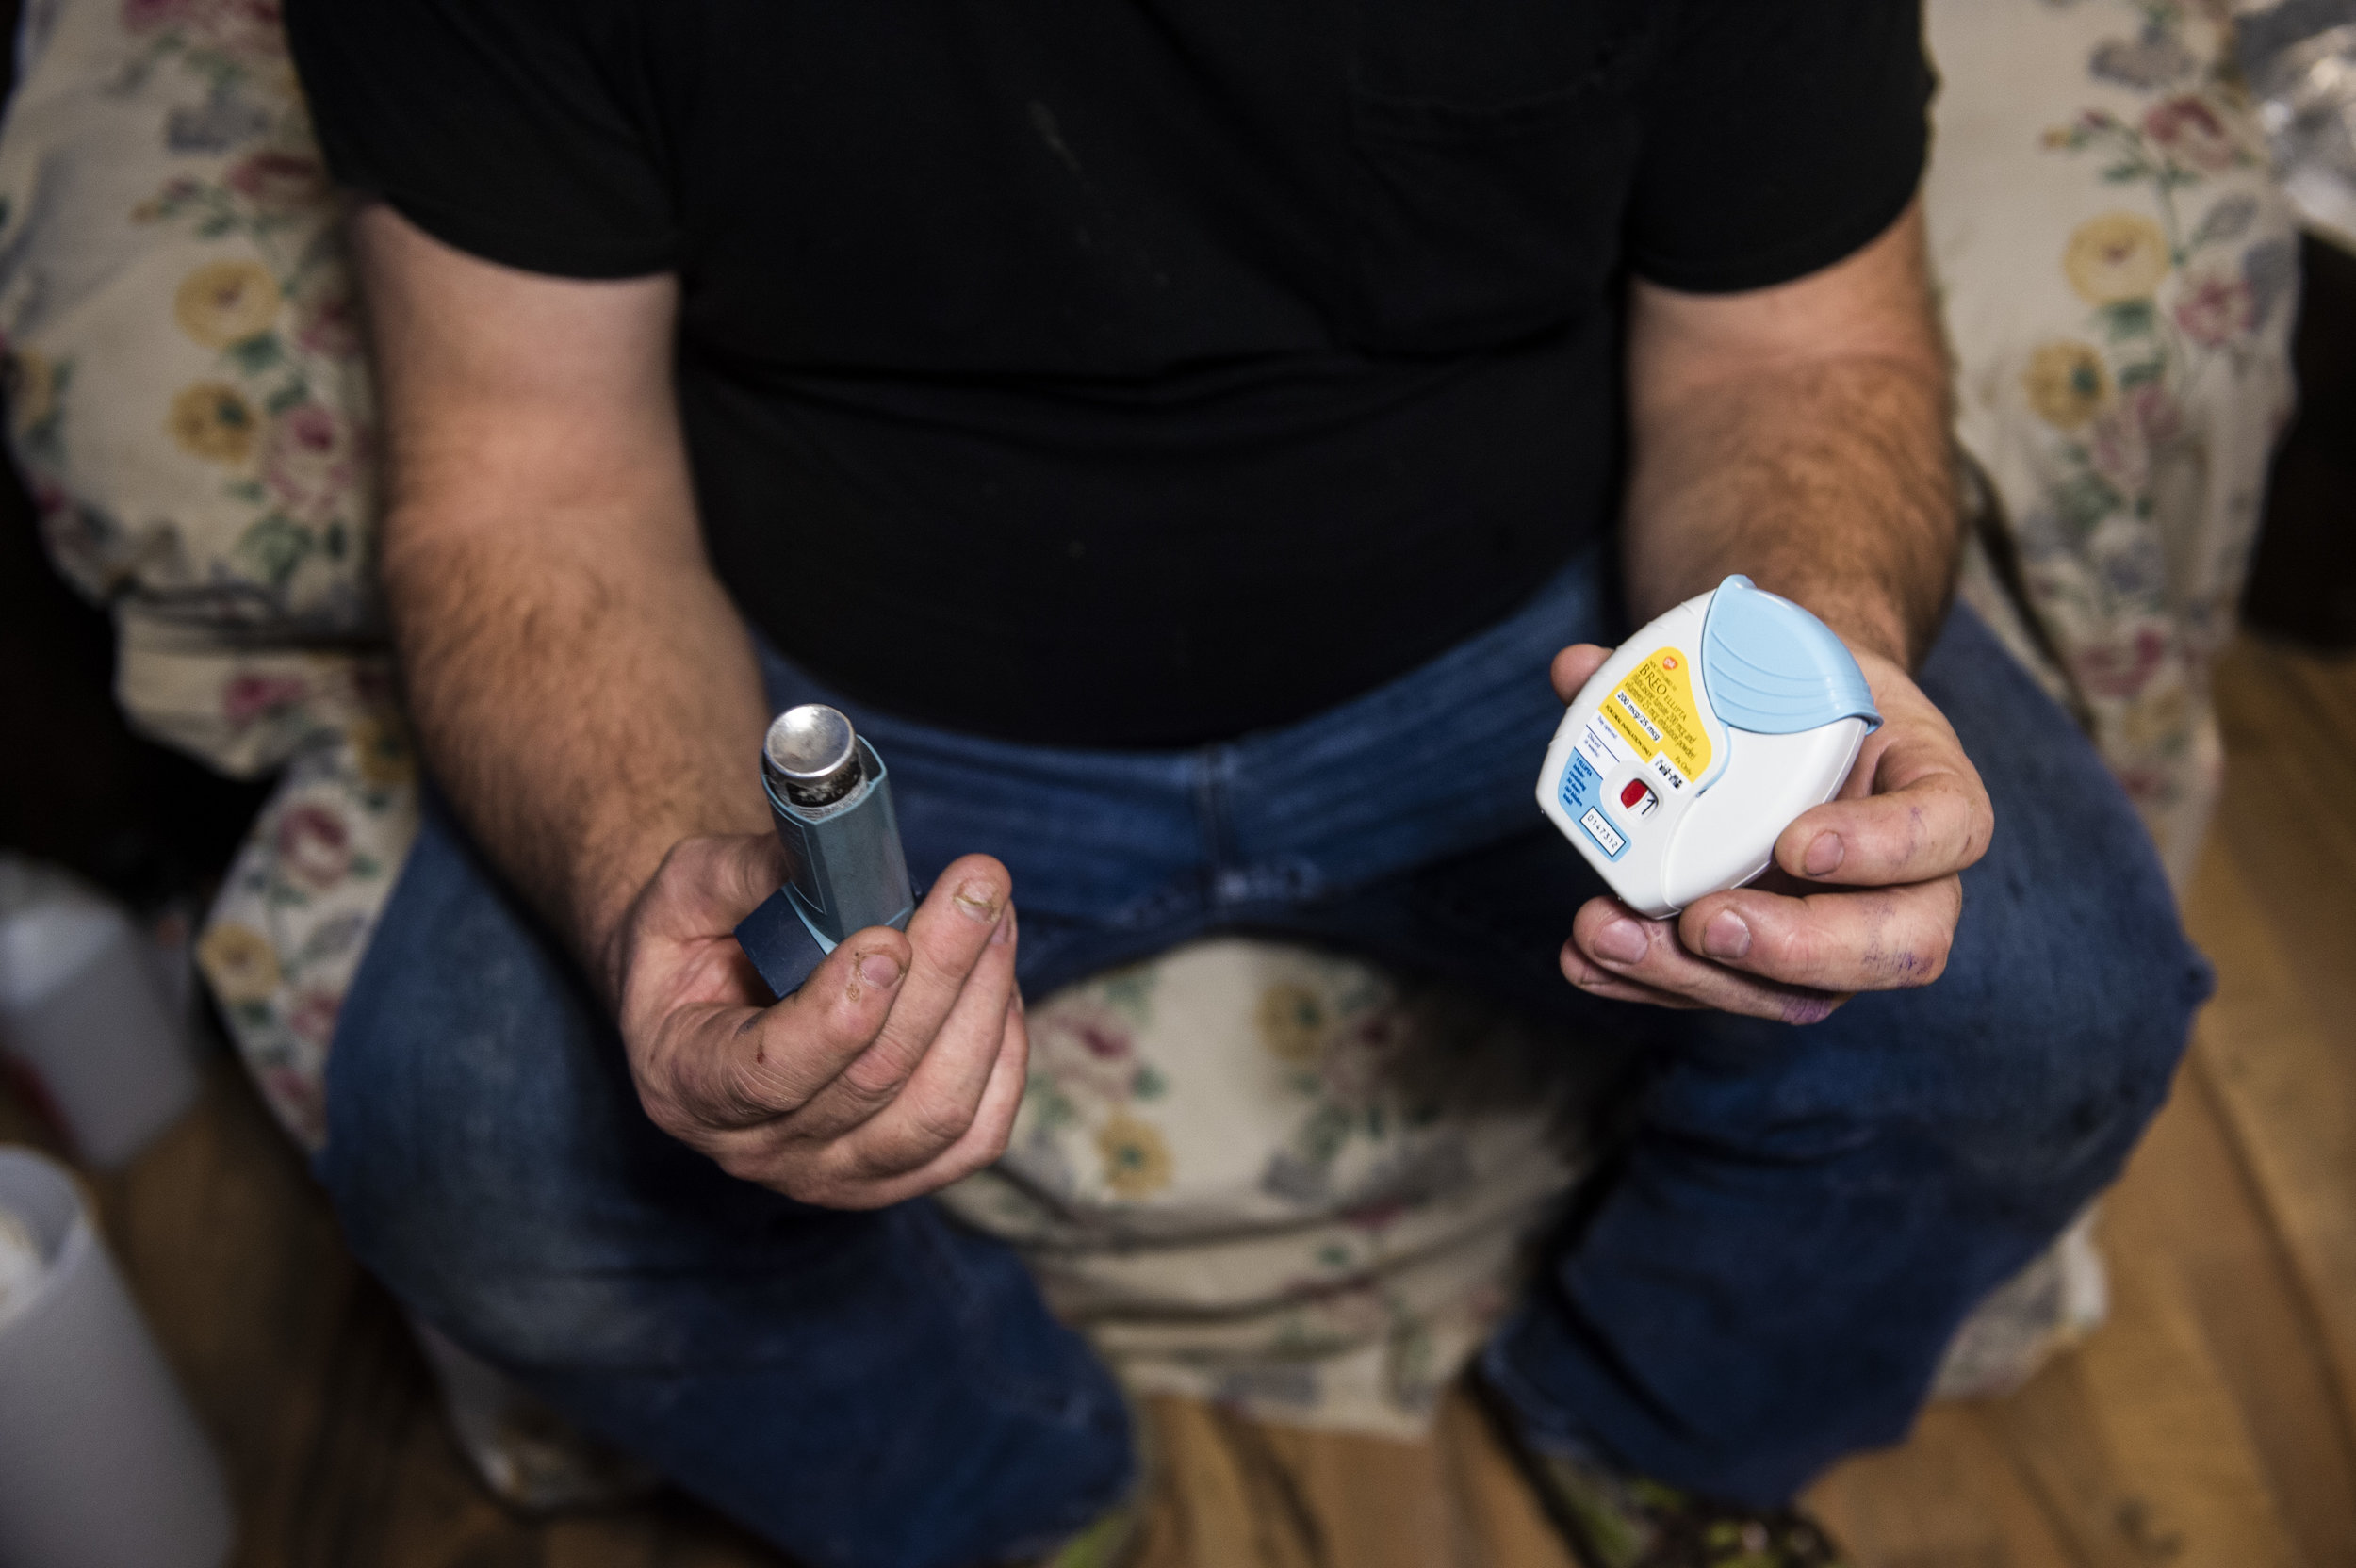  Harold Dotson shows the two inhalers he uses when he has breathing episodes due to his Black Lung Disease on Thursday, January 17 in Paw Paw, Kentucky. 